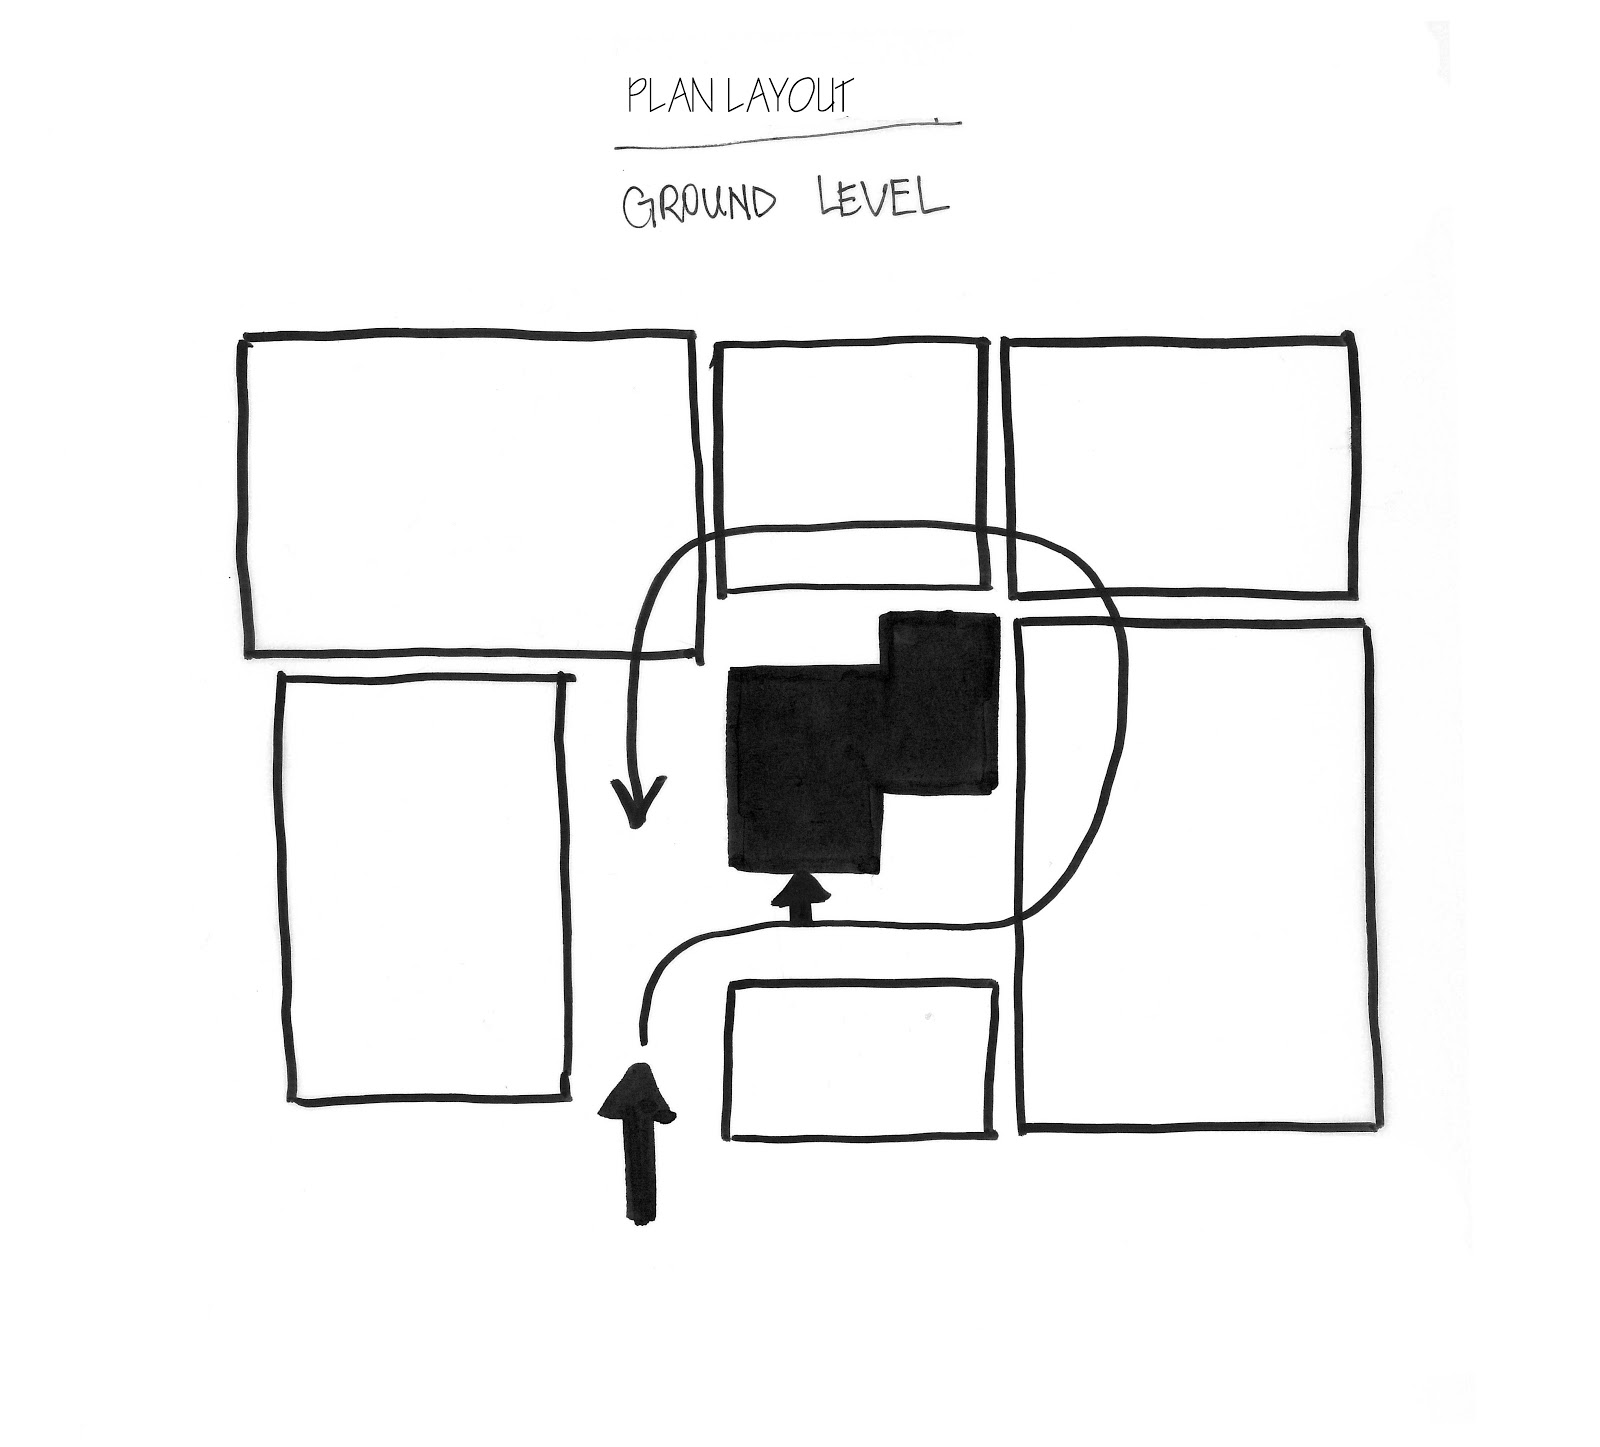 THE RIETVELD SCHRODER HOUSE DIAGRAMS AN IN DEPTH 